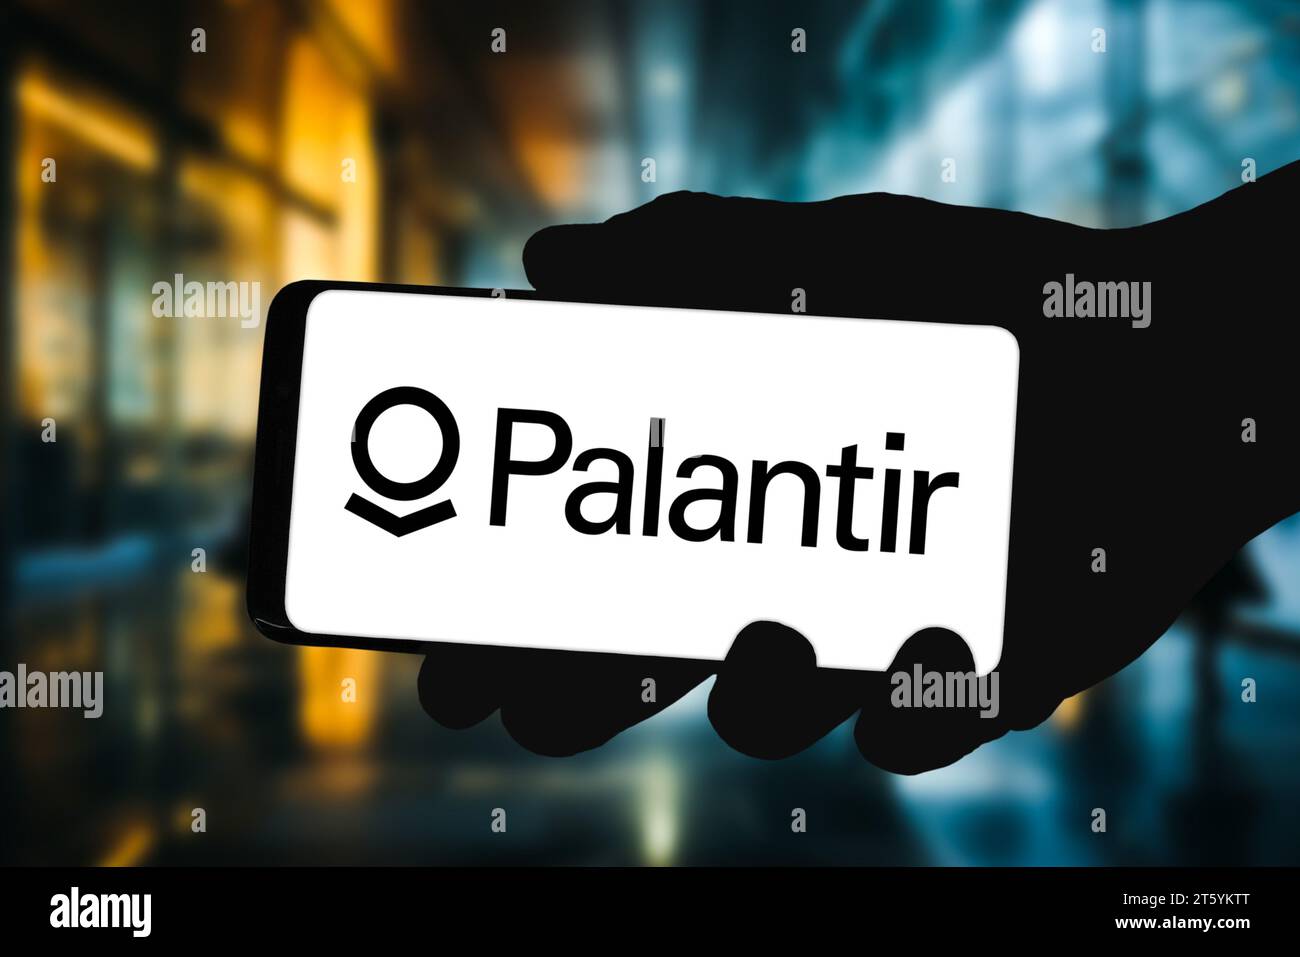 Palantir Technologies - American company that specializes in big data analytics Stock Photo